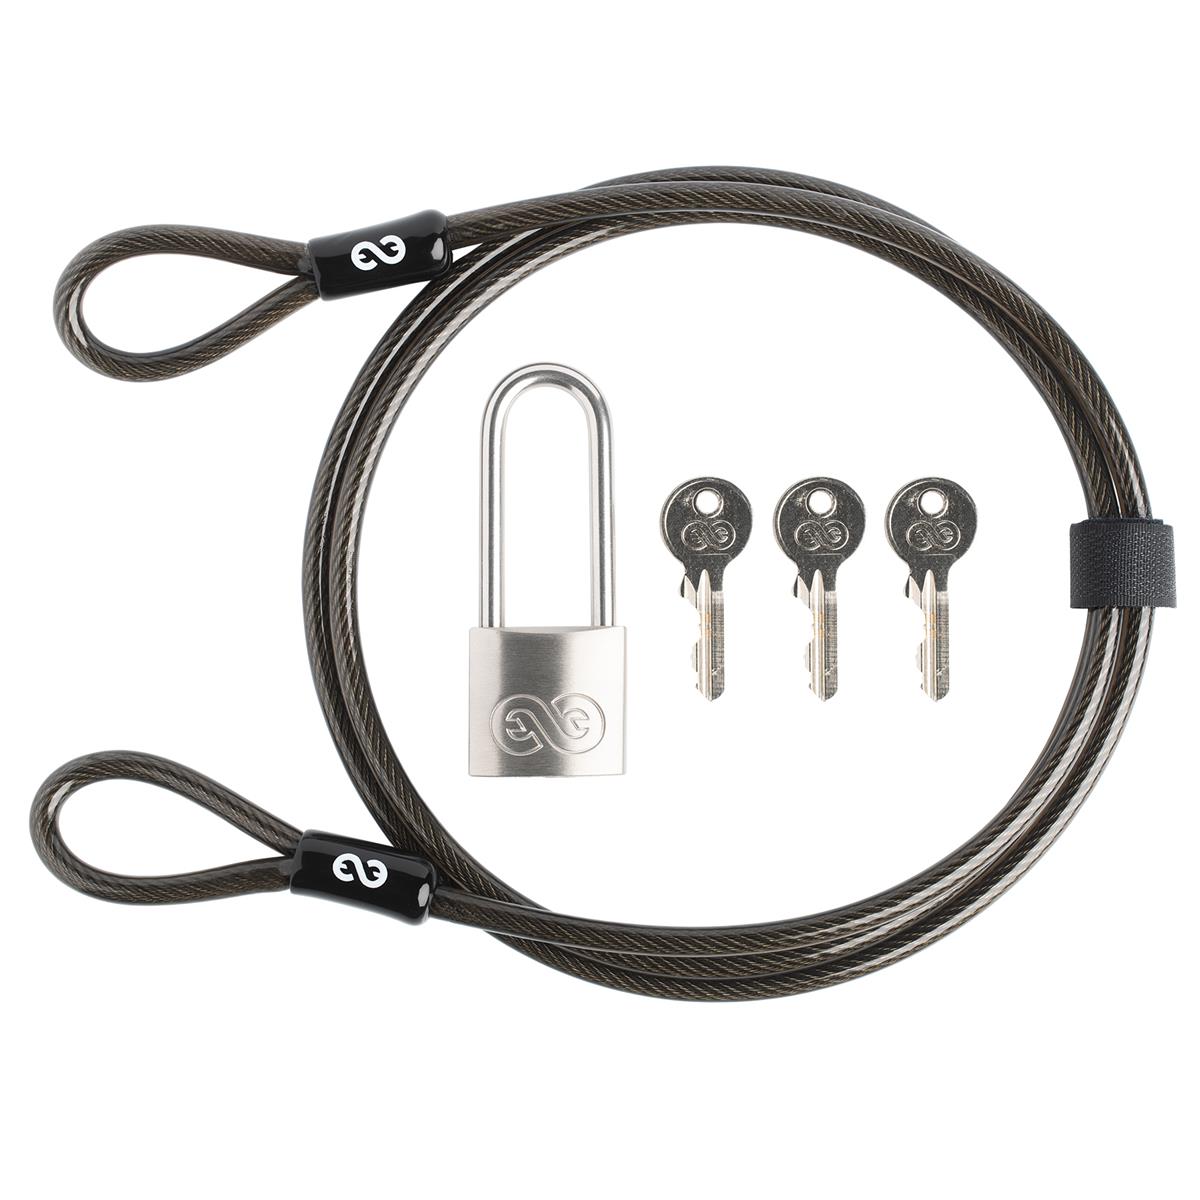 Image of Enlaps Security Cable Lock for Tikee Camera